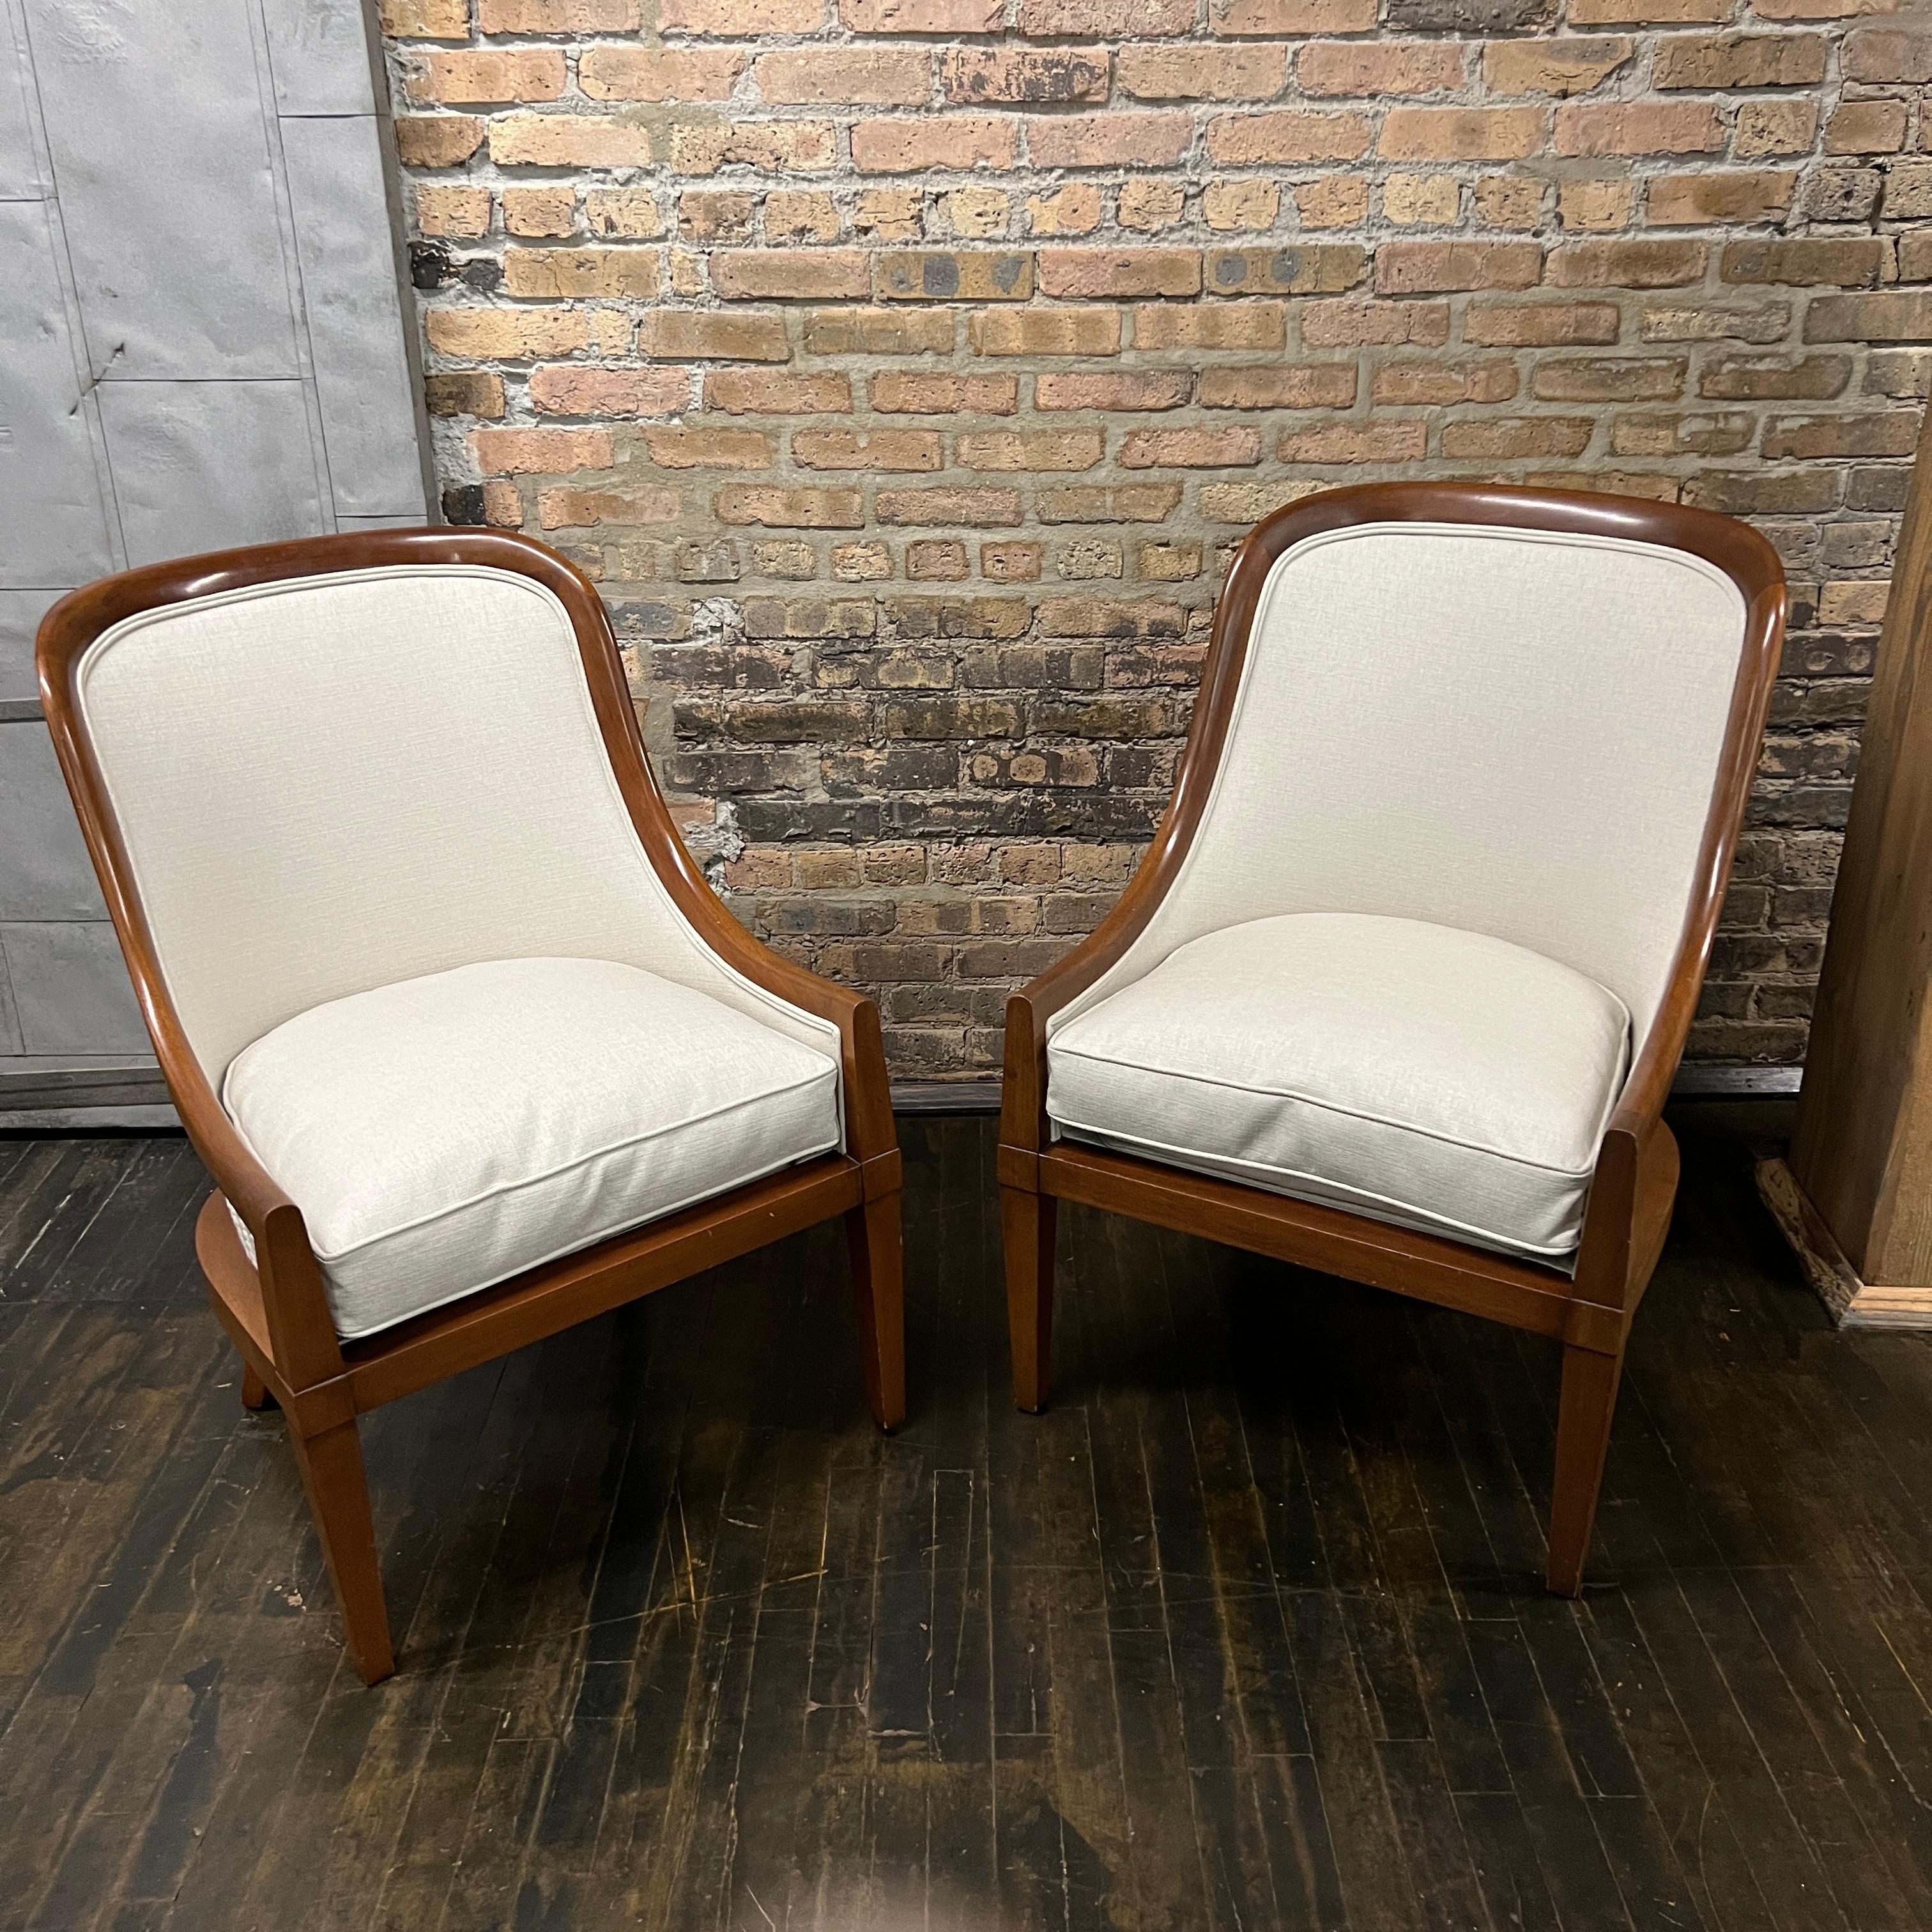 These gorgeous chairs have lovely solid walnut frames and very light gray linen upholstery (on the front of the chair and the seat cushions).  The seat cushions are down filled.  The back of the chair is upholstered in a coordinating cut velvet that